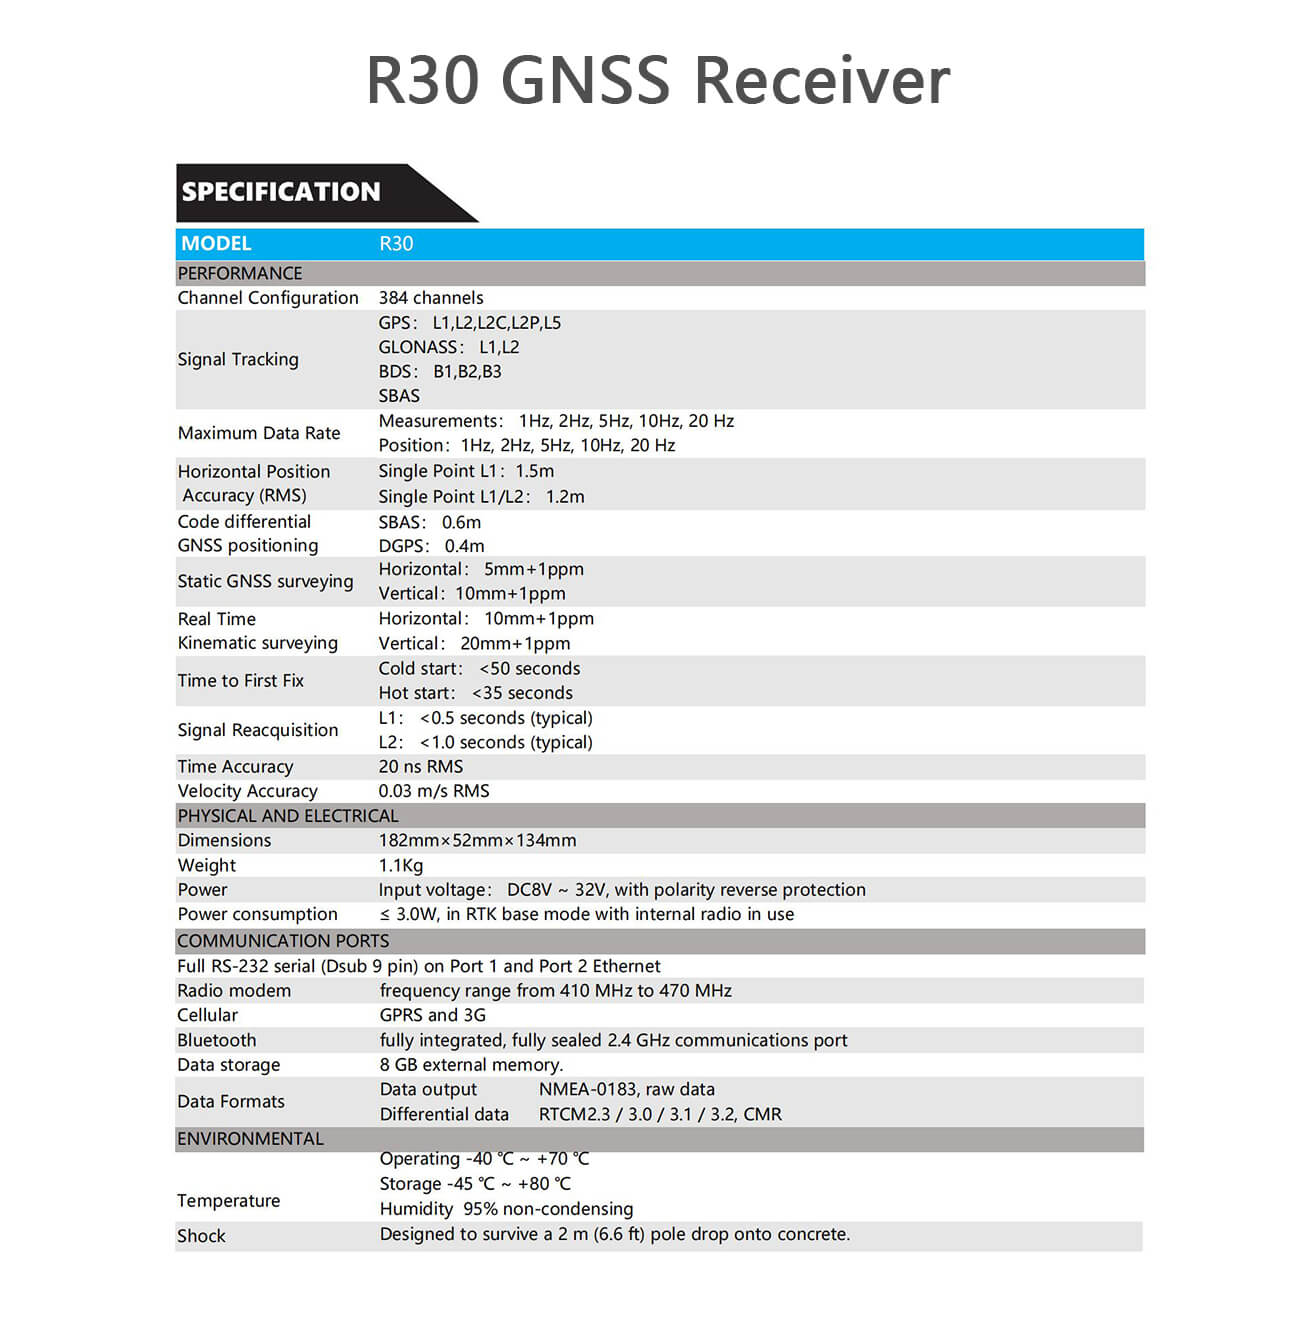 R30 GNSS Receiver